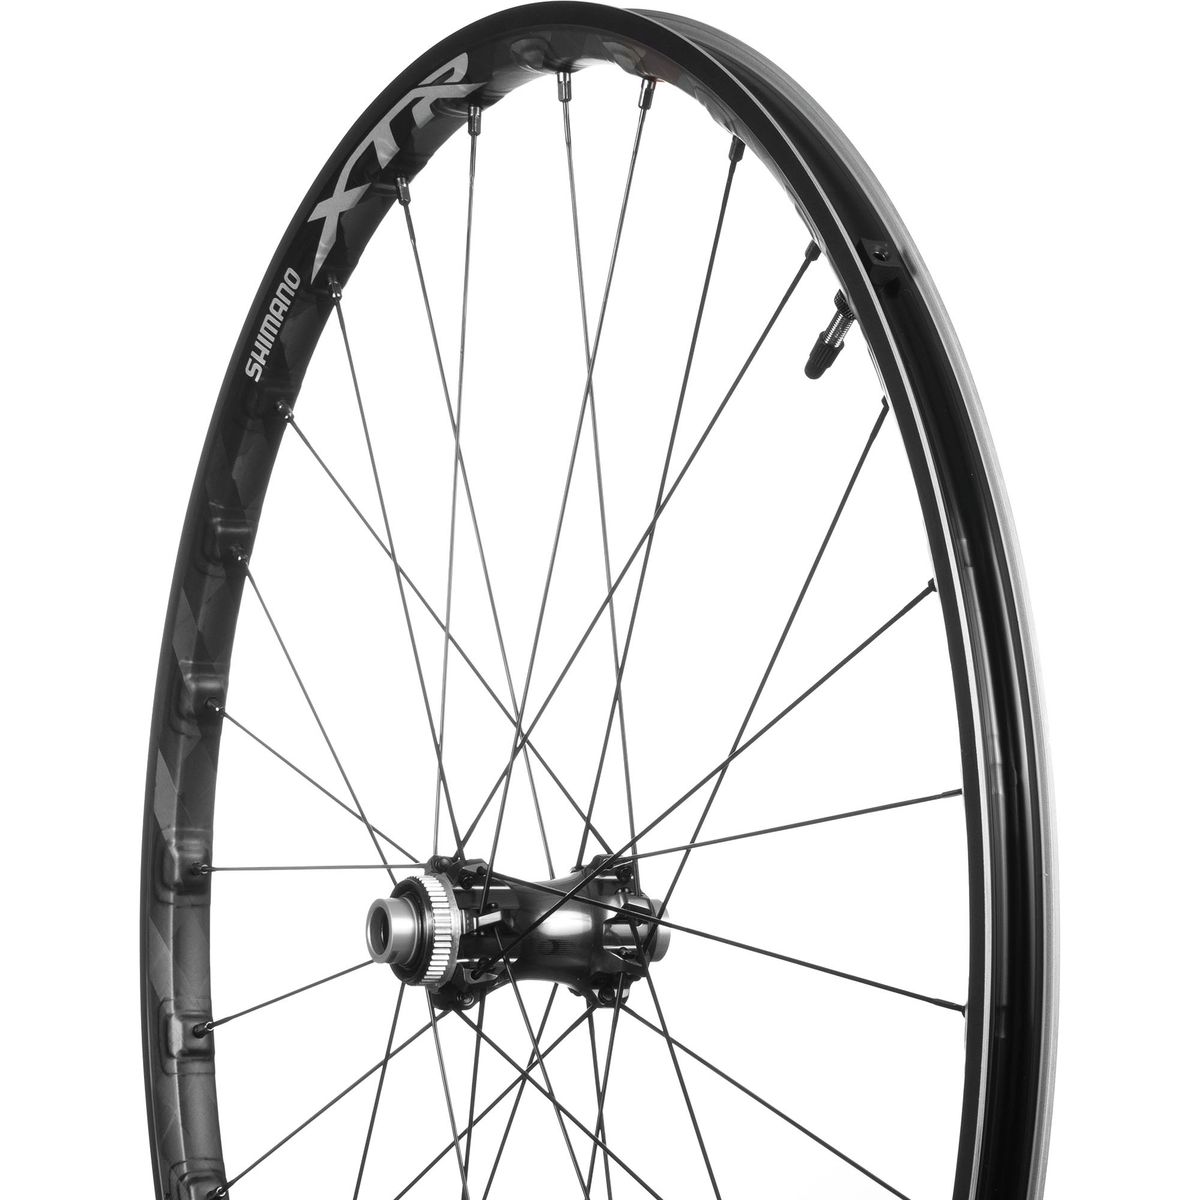 Shimano XTR WH M9000 TL 27.5in Wheelset